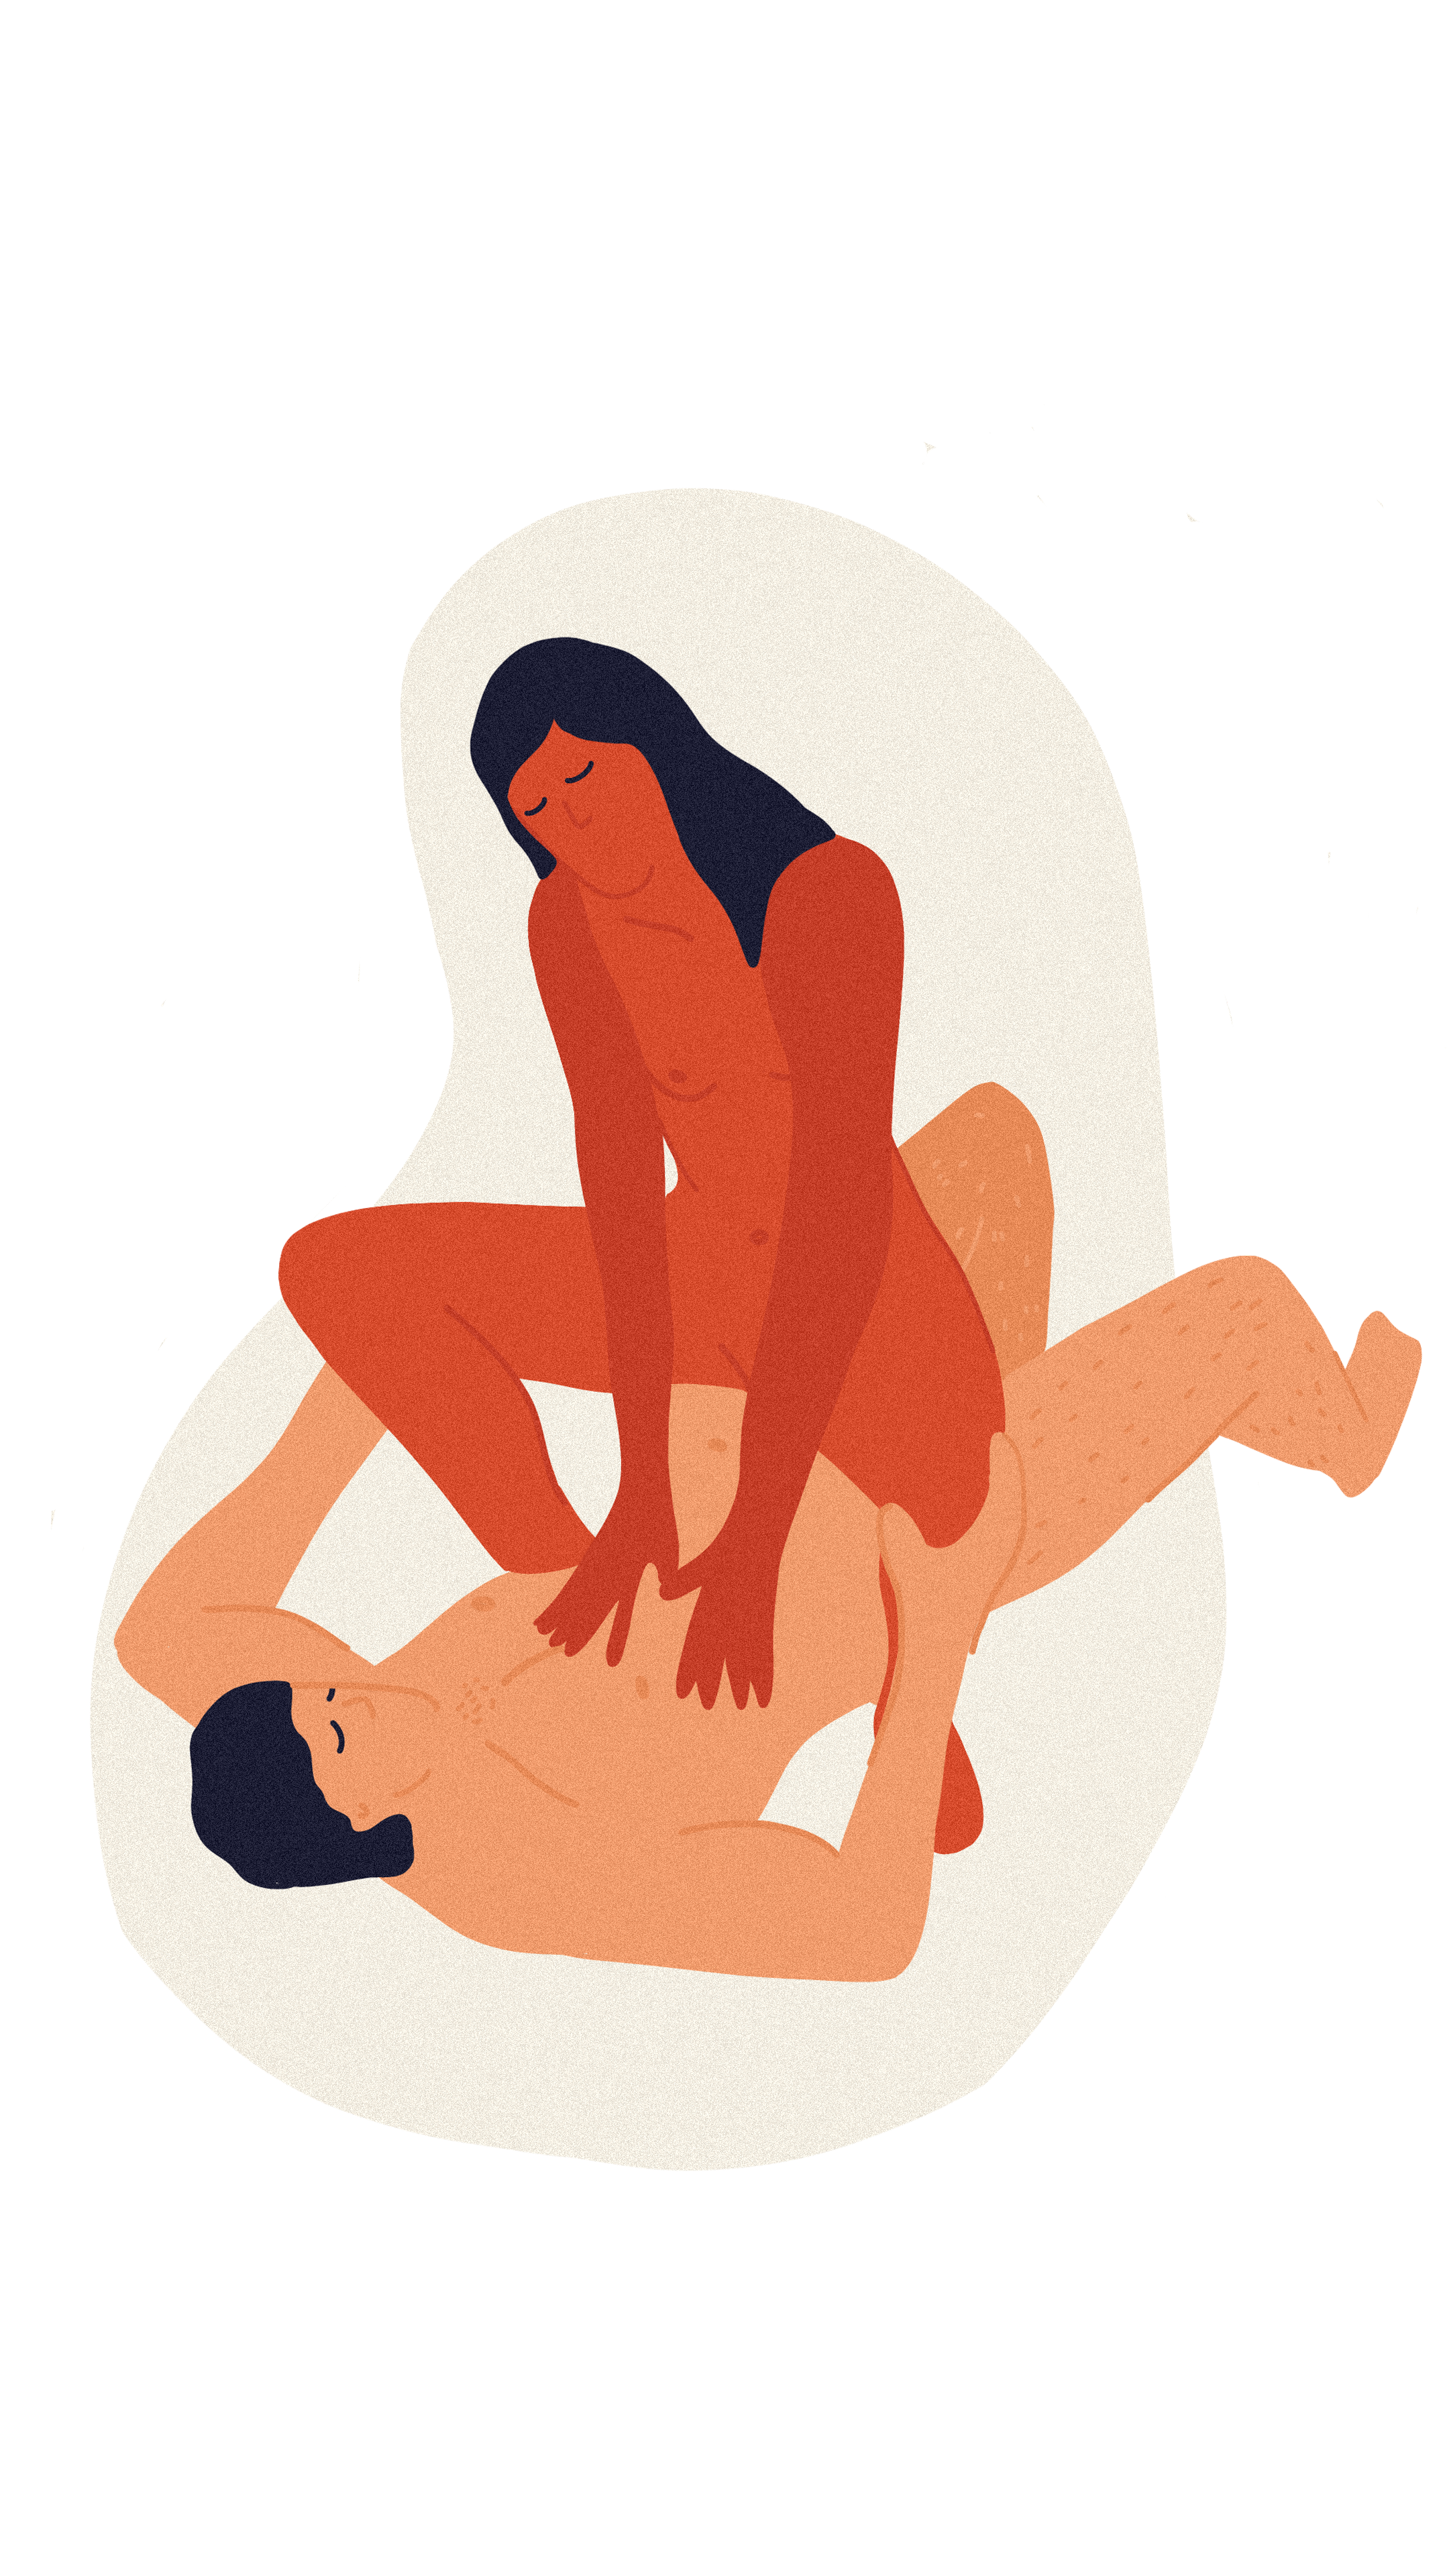 8 Tantric Sex Positions for Better Sex, According to Experts